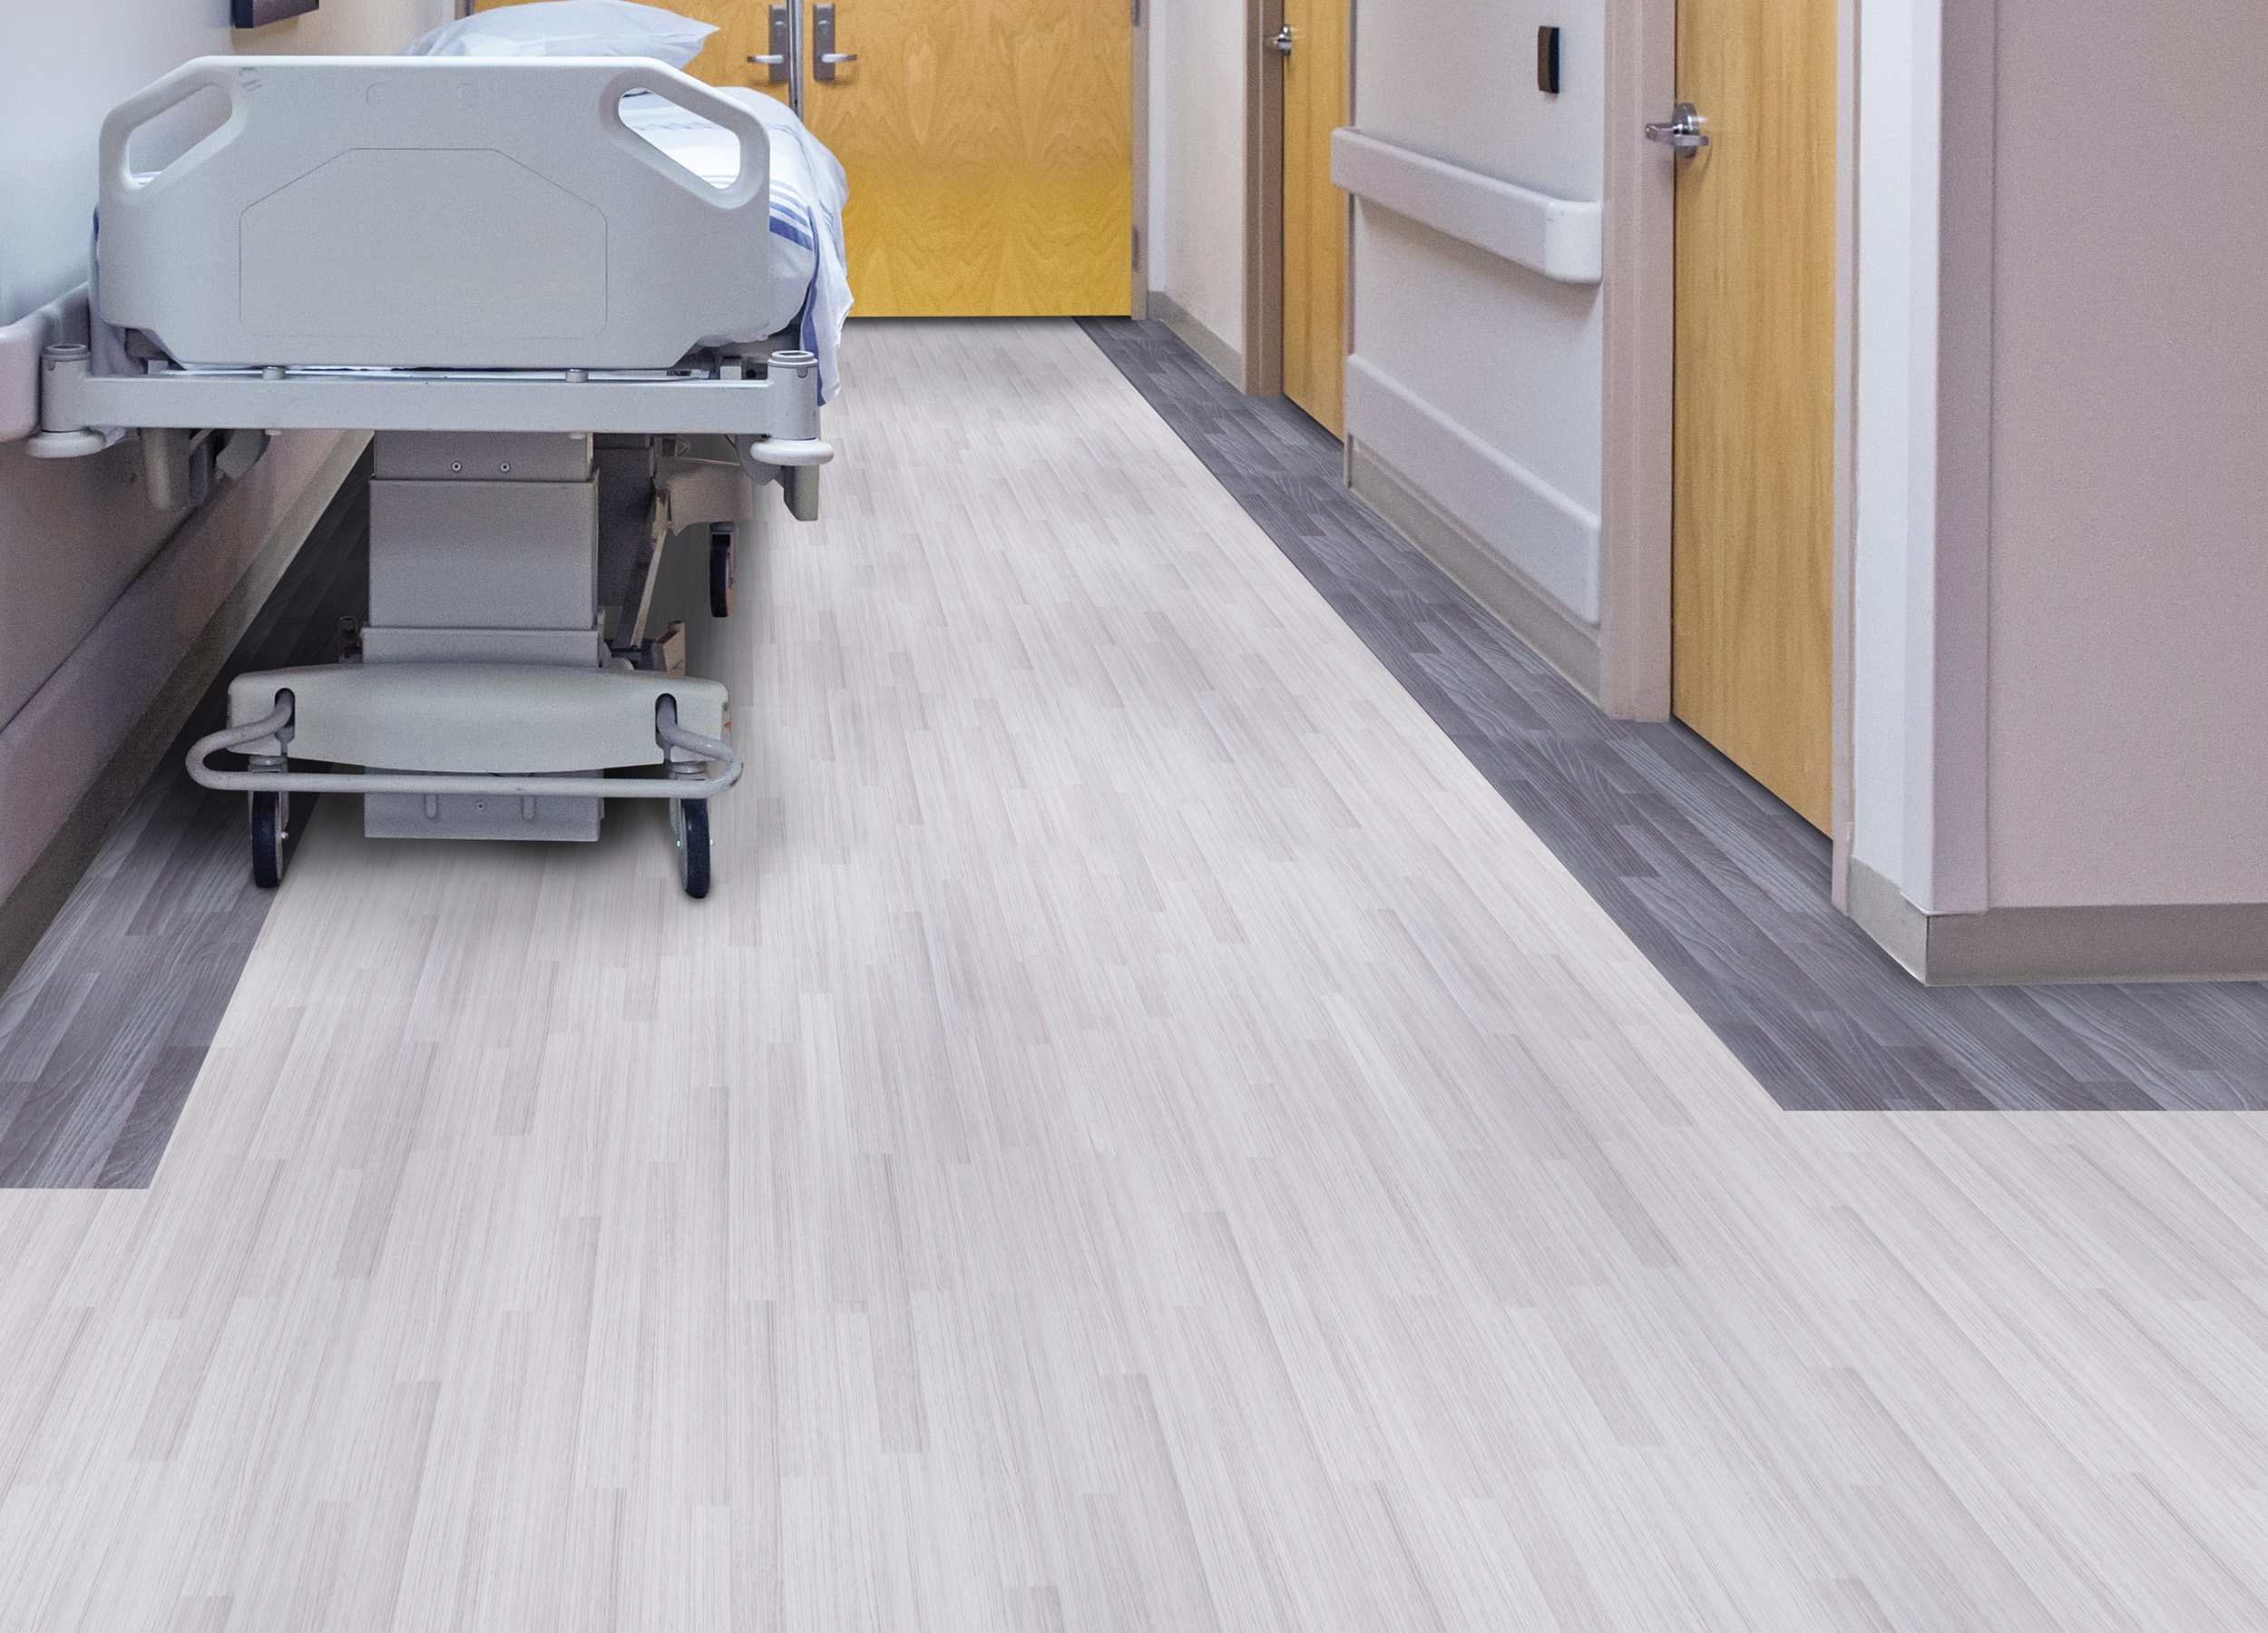 Assisted living flooring installed in a medical area